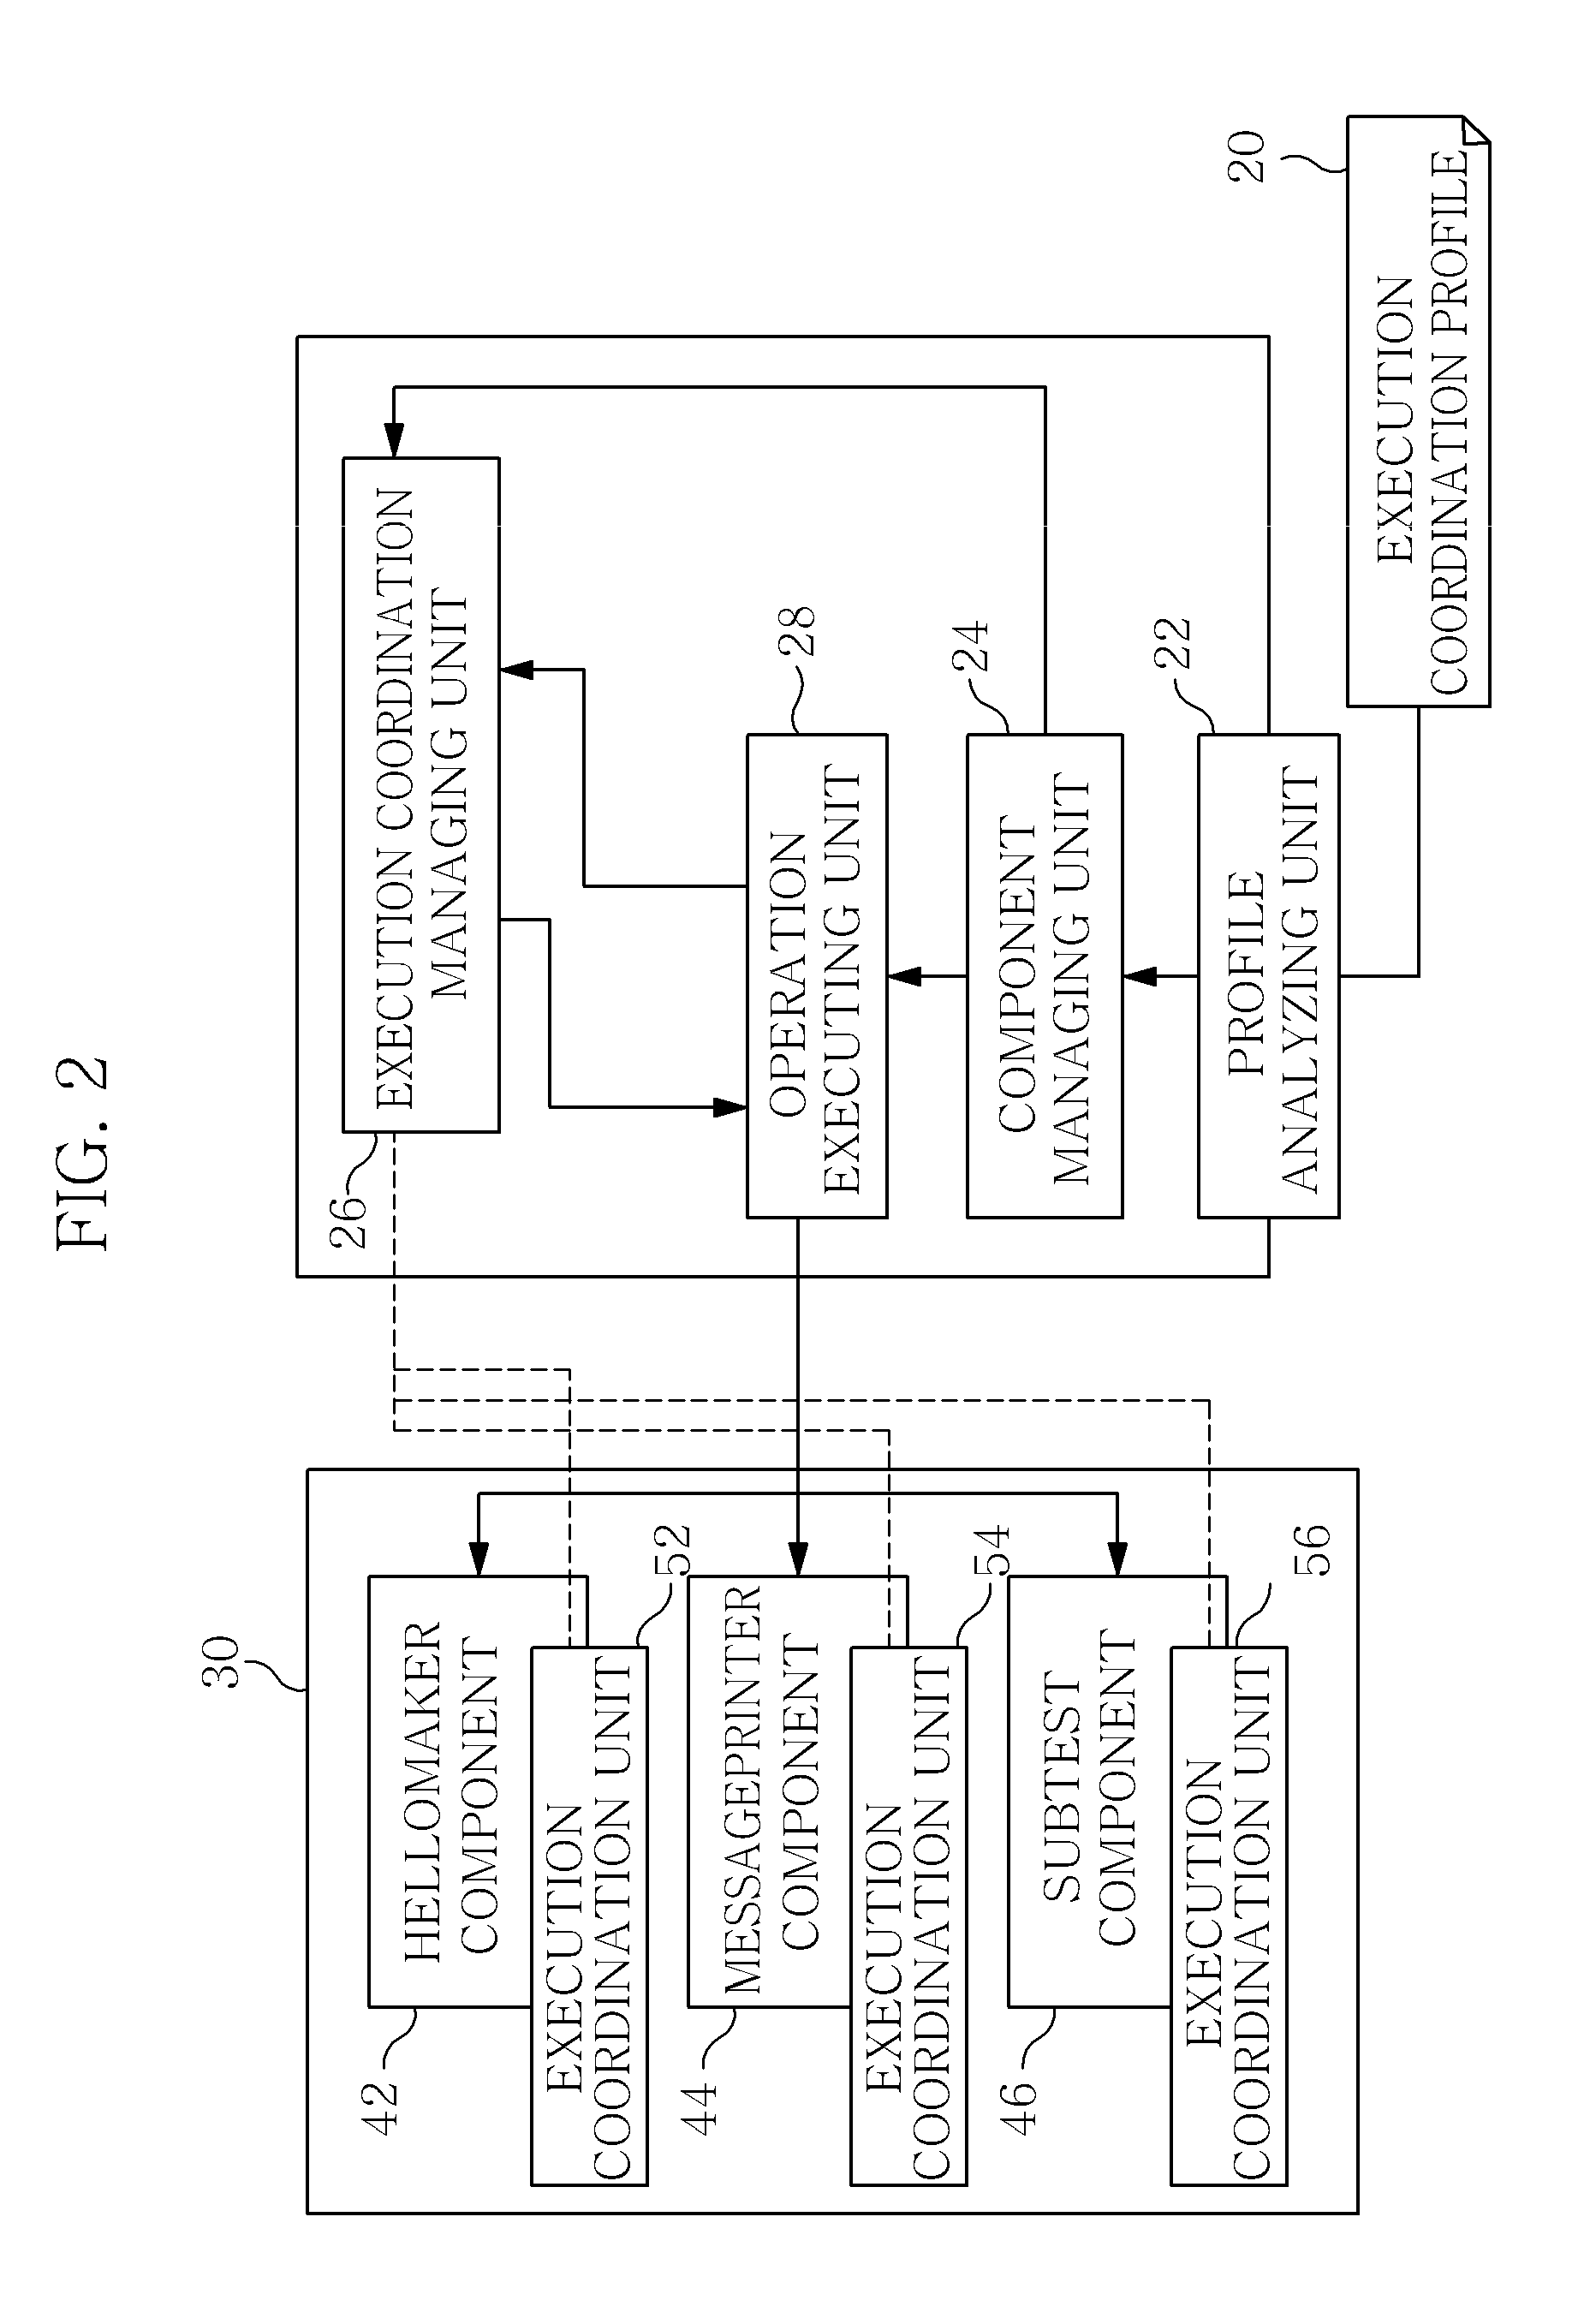 Apparatus and method of coordinating operation action of robot software component